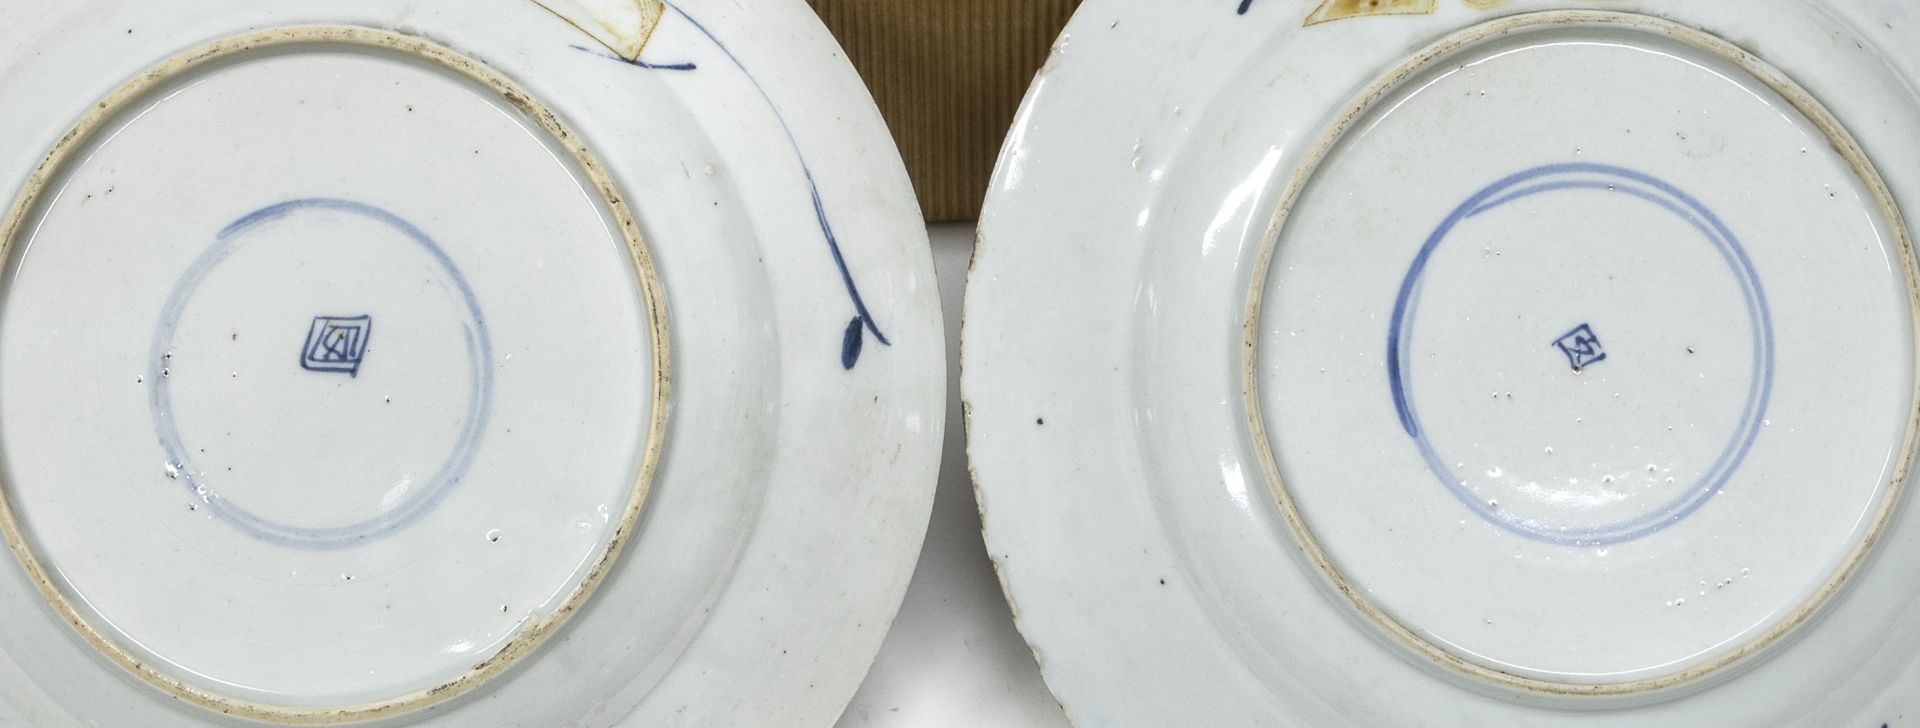 A PAIR OF WHITE AND BLUE PORCELAIN DISHES CHINA 19TH CENTURY - Image 2 of 2